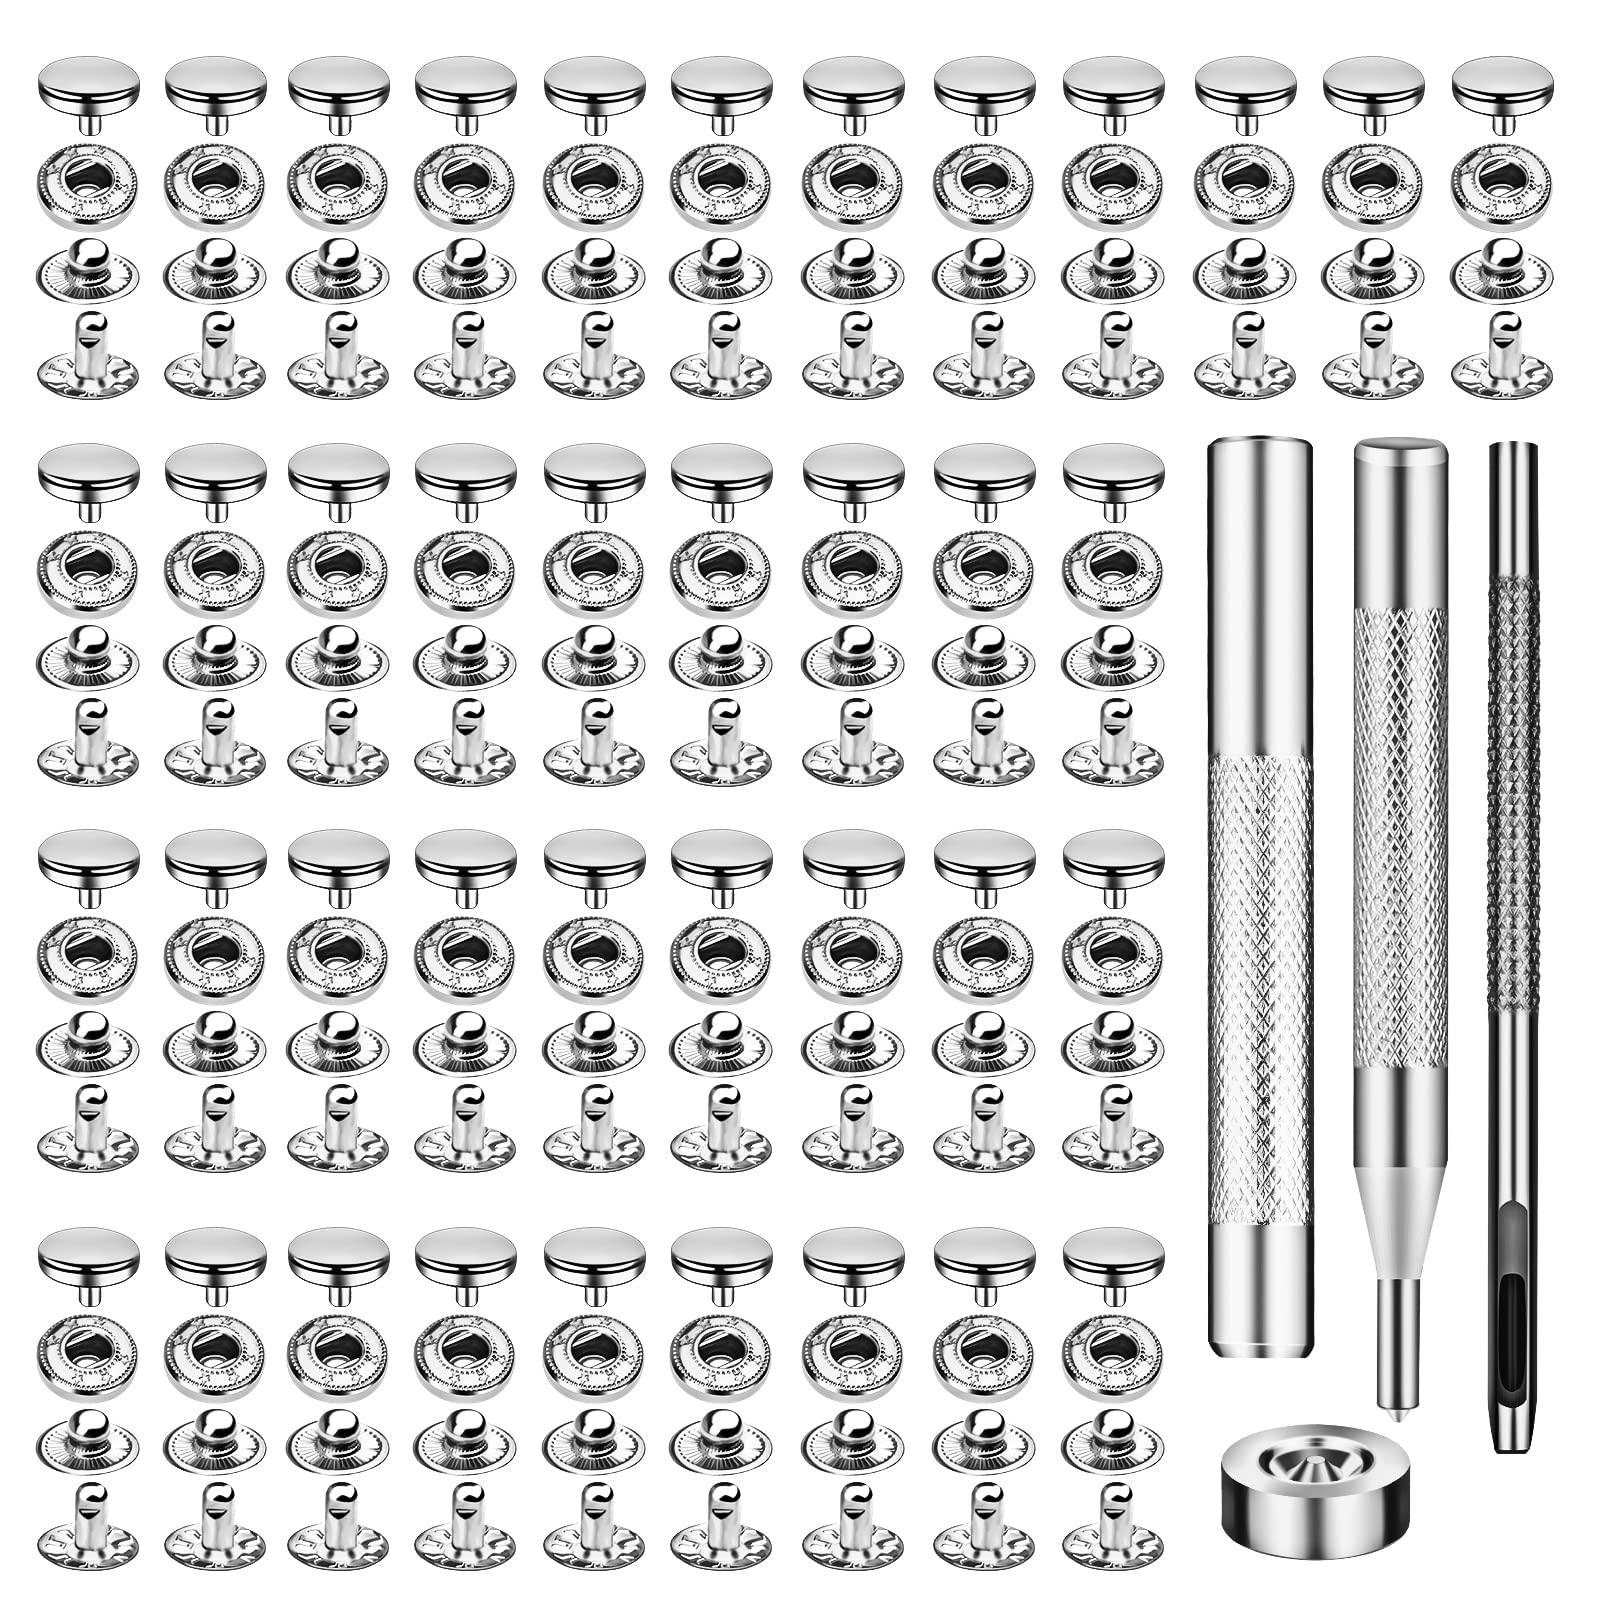 40 Sets Snap Fastener Kit with Tool, Press Stud Snap Button for Leather  Craft Jeans Jackets Bags Accessories Base Tools/Case(Black)